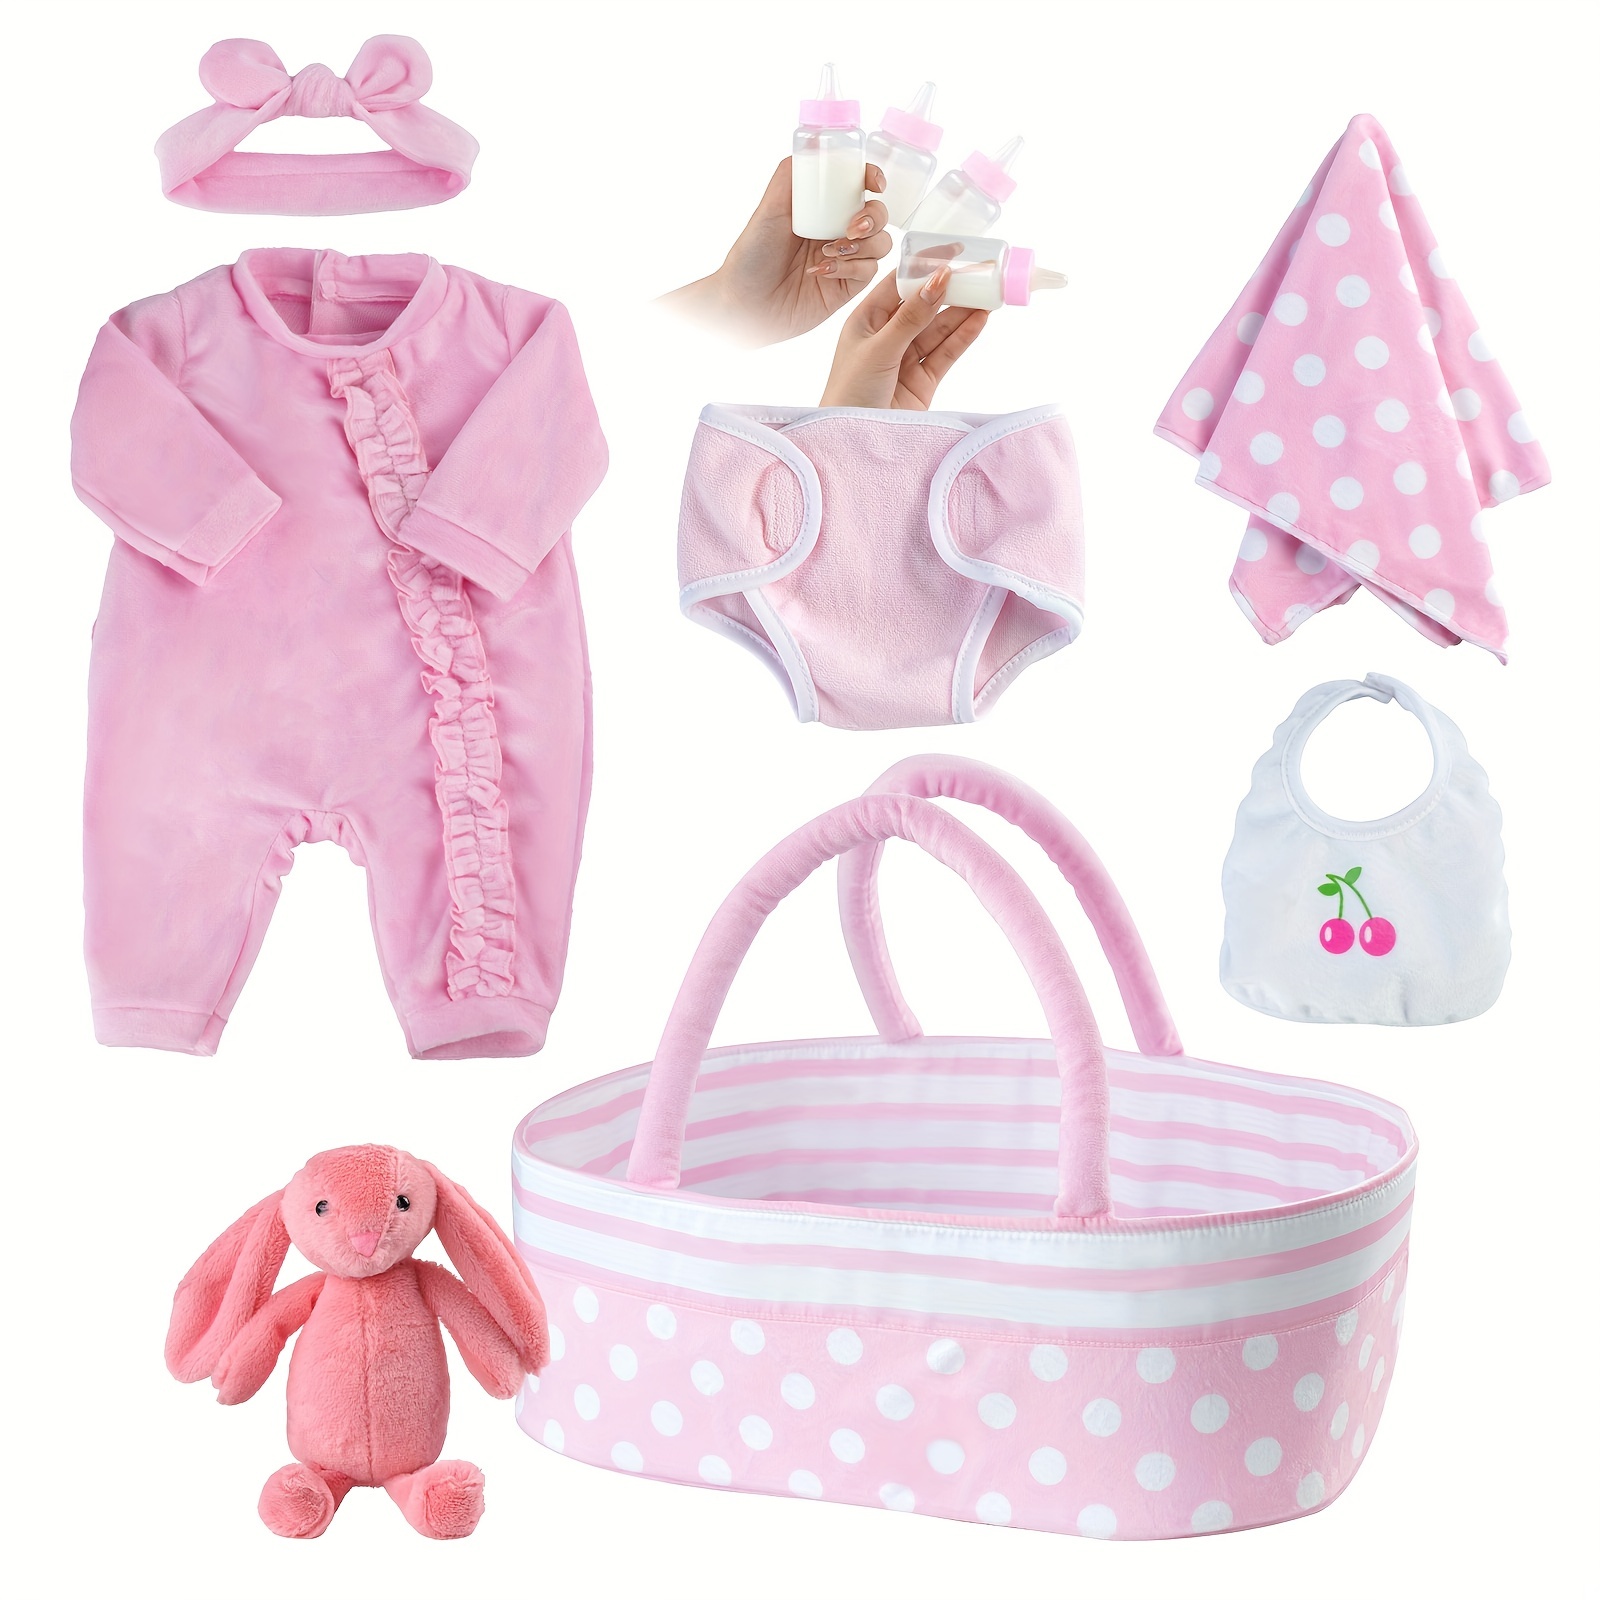 Reborn Baby Doll Accessories Basket Baby Doll Clothes Outfit